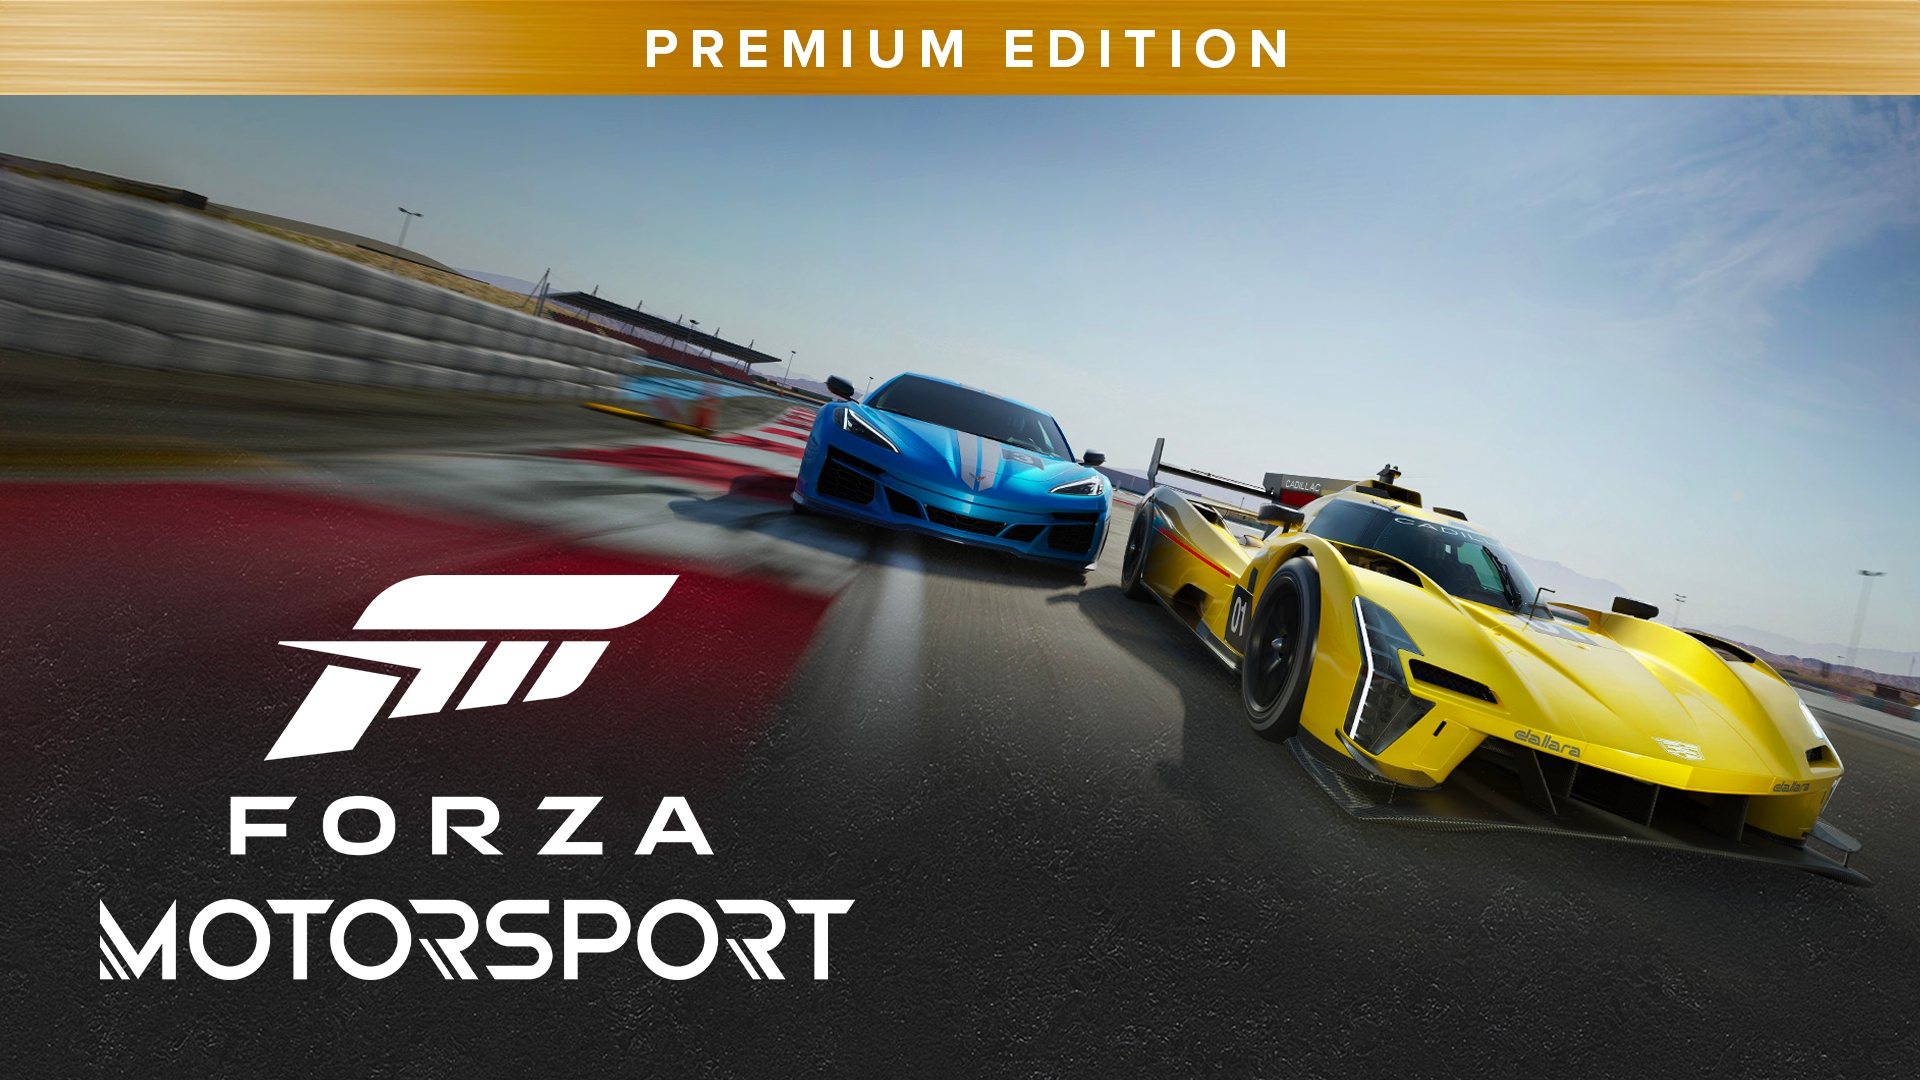 Forza Motorsport returns with an Xbox Series X/S and PC reboot